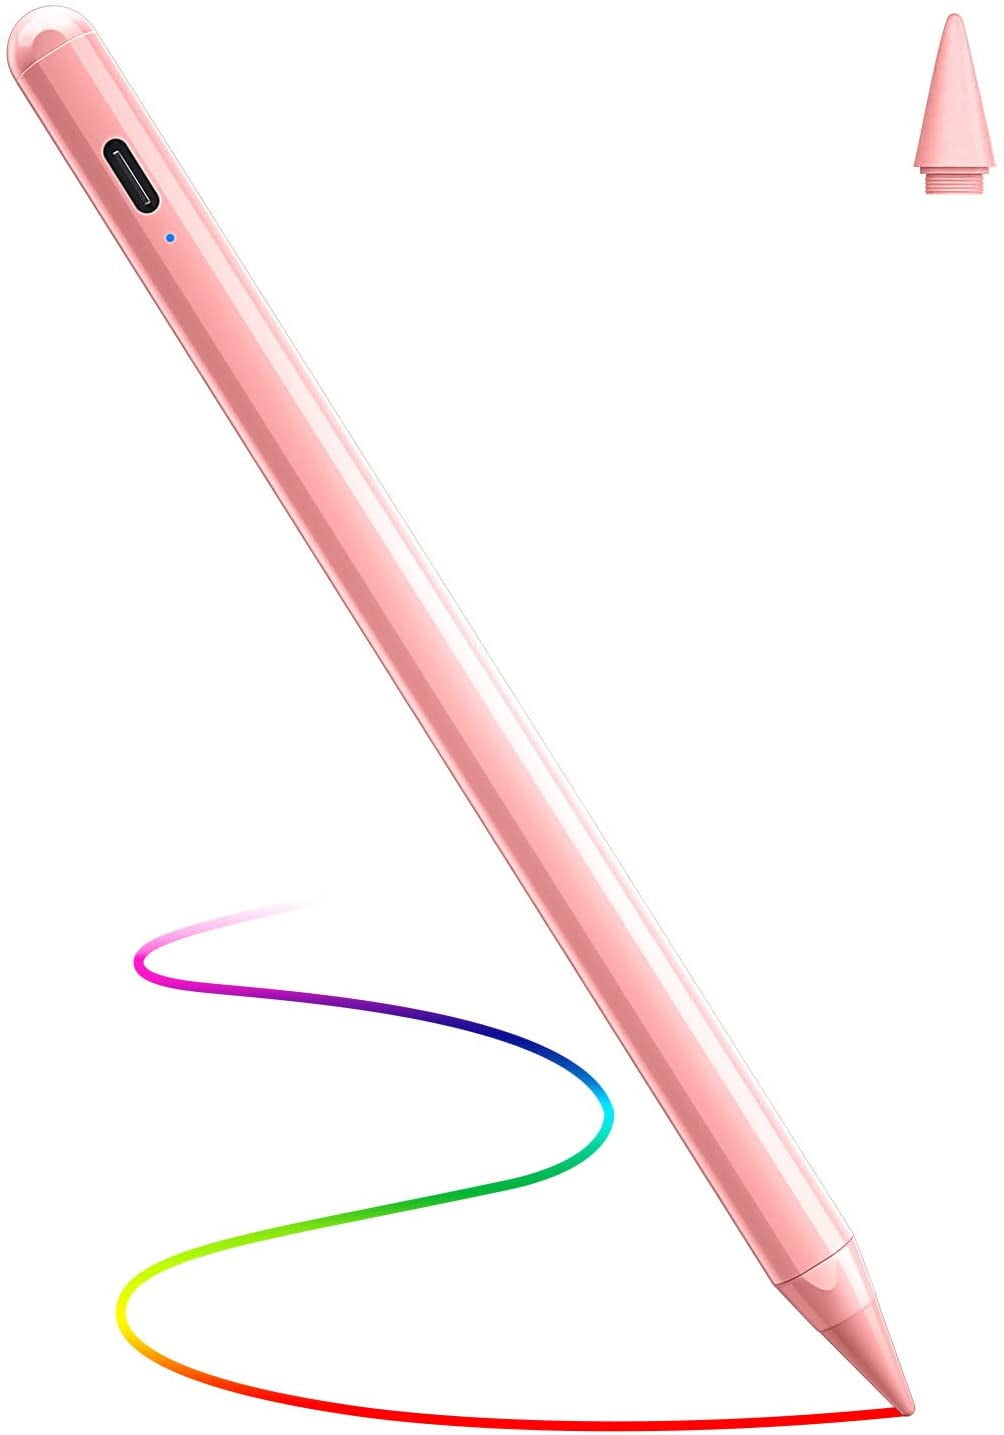 meesterwerk stoom Nutteloos DTTO Stylus Pen for iPad with Palm Rejection, for Precise Writing/Drawing  (Pink) - Walmart.com